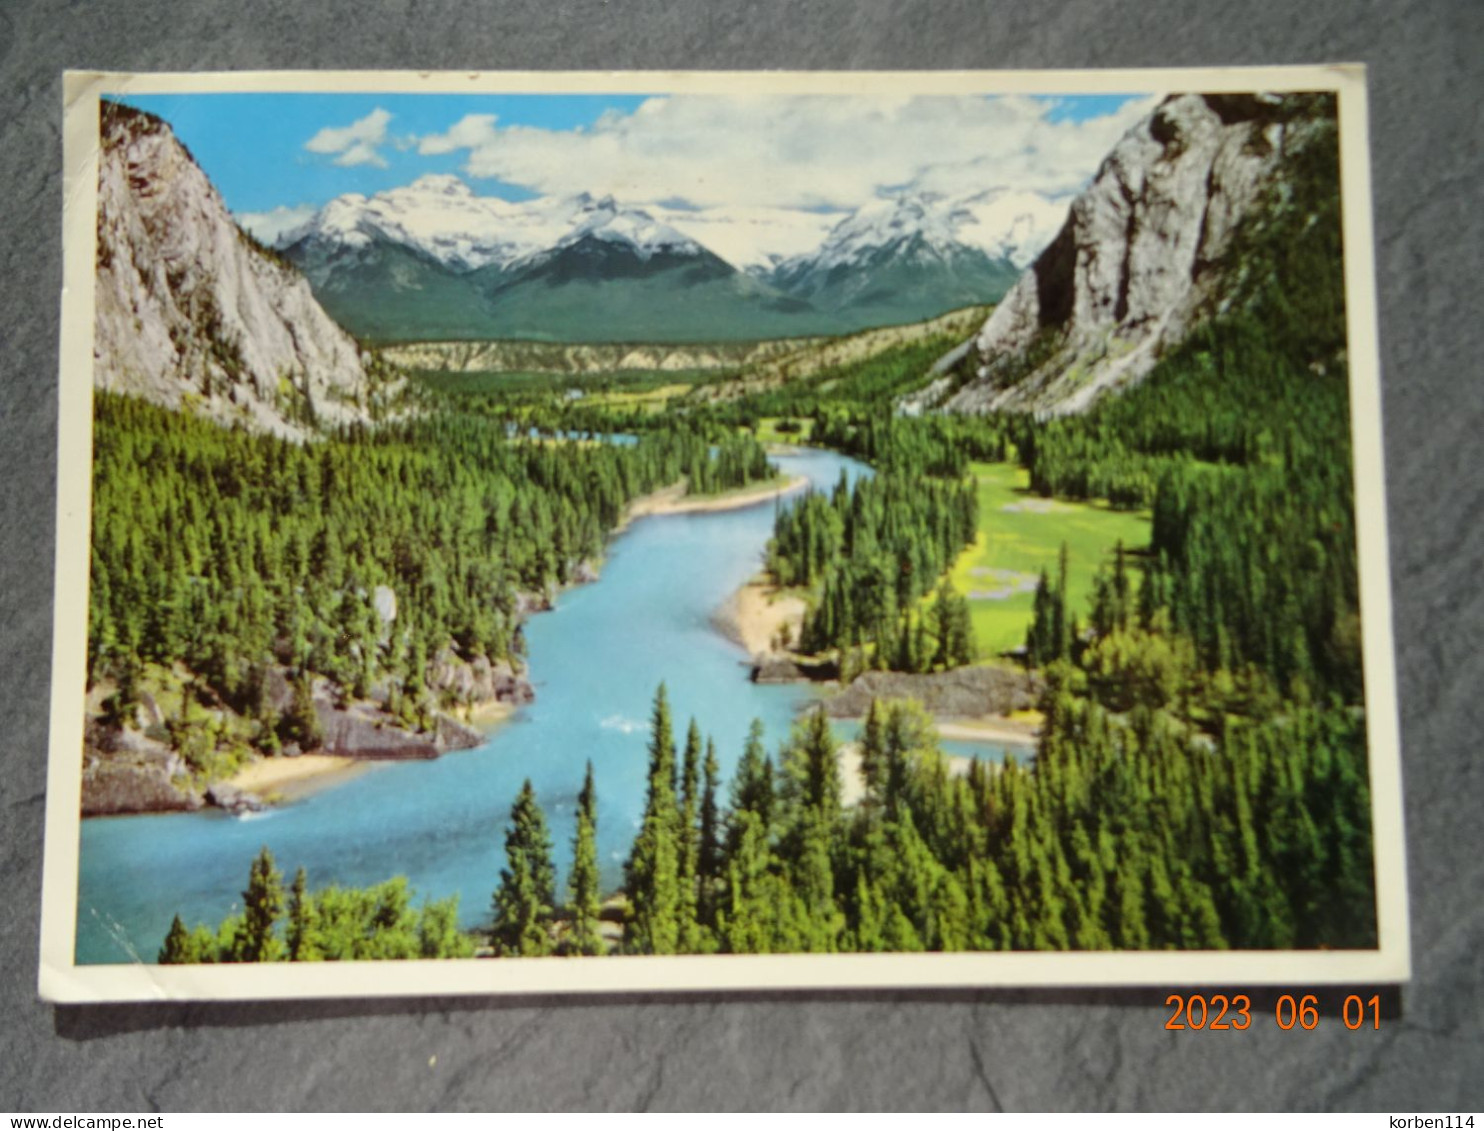 THE BOW VALLEY AT BANFF - Banff